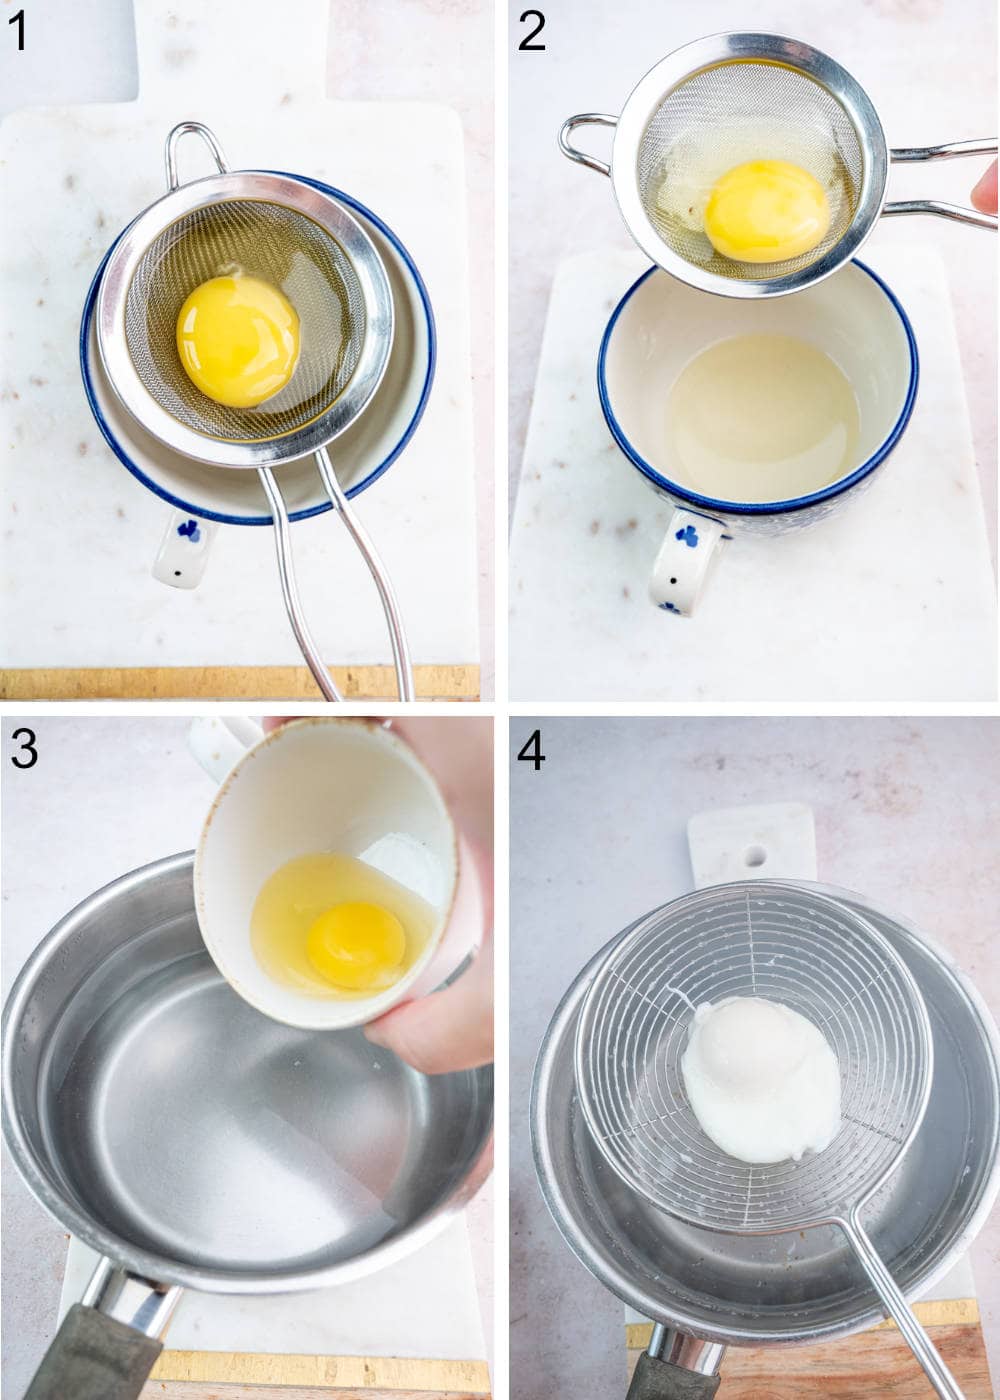 A collage of 4 photos showing how to poach an egg step by step.